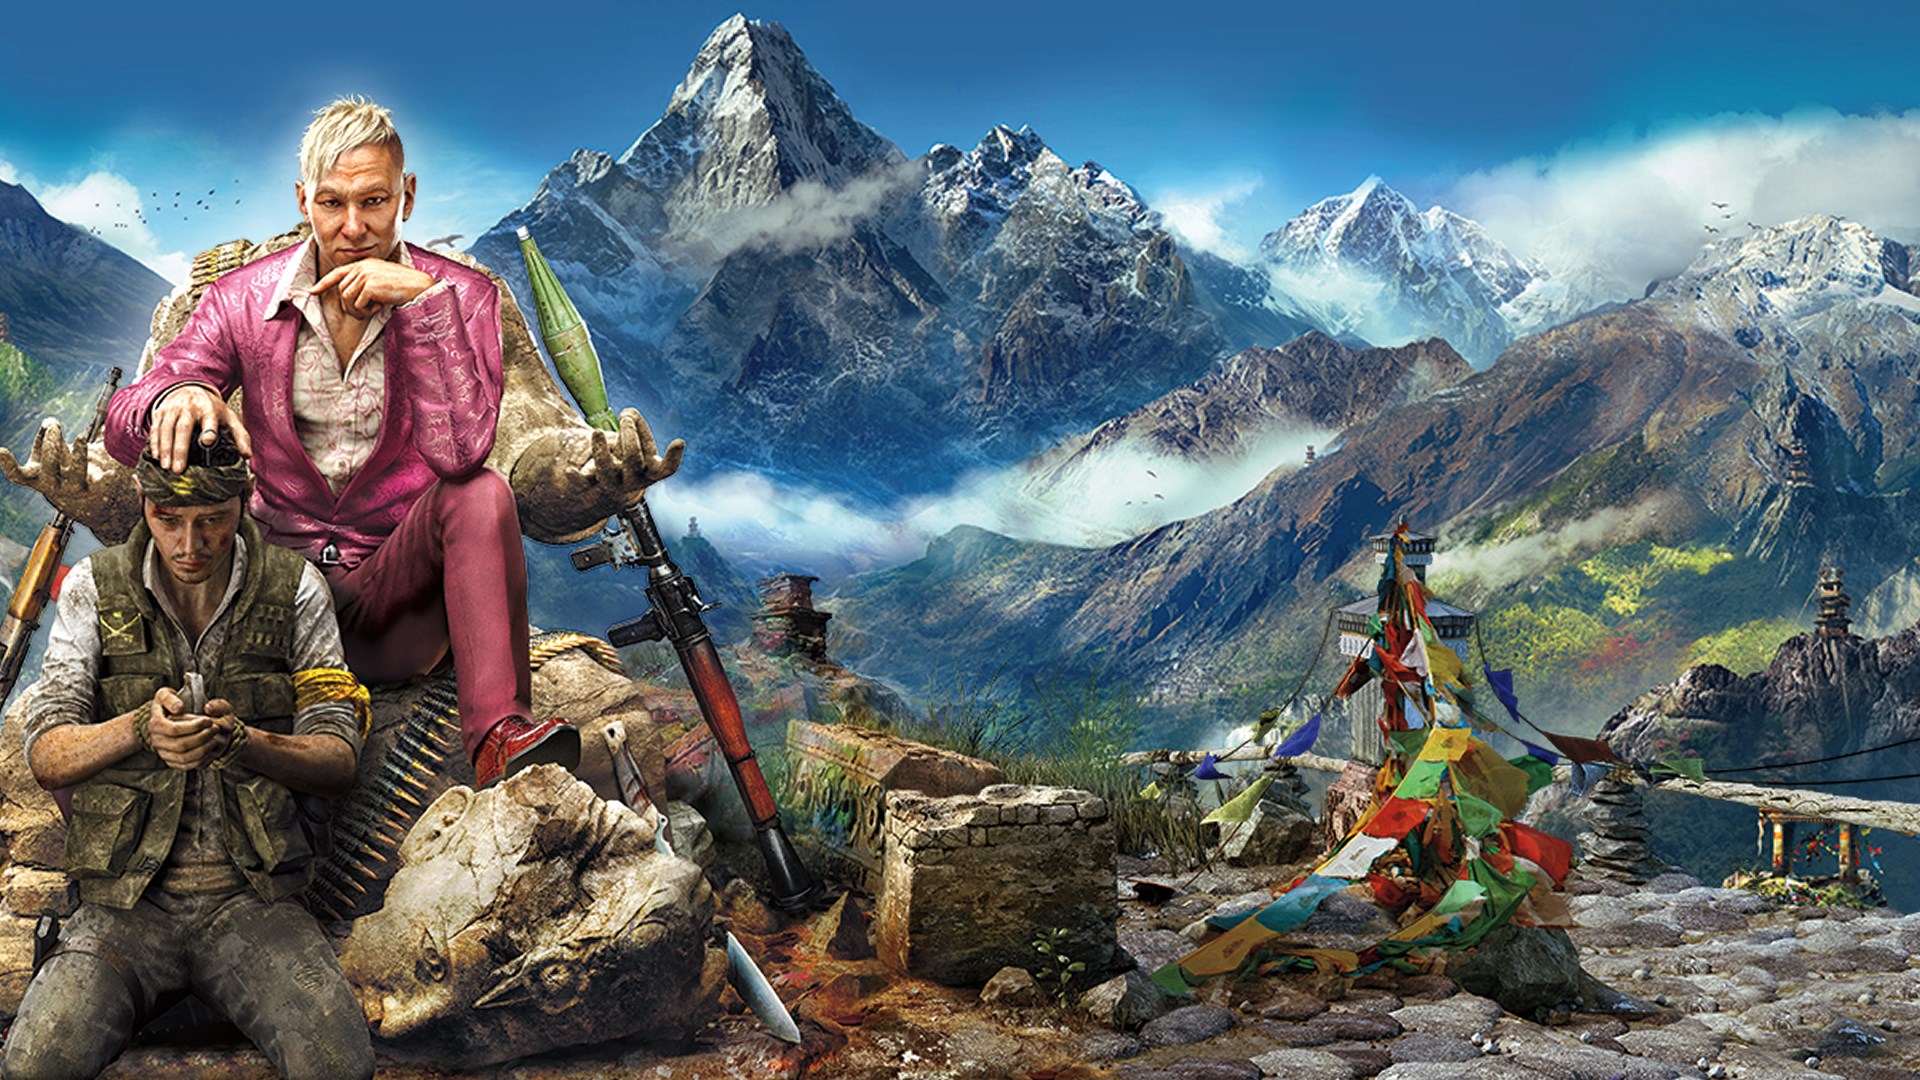 Far cry 4 for ppsspp windows 7